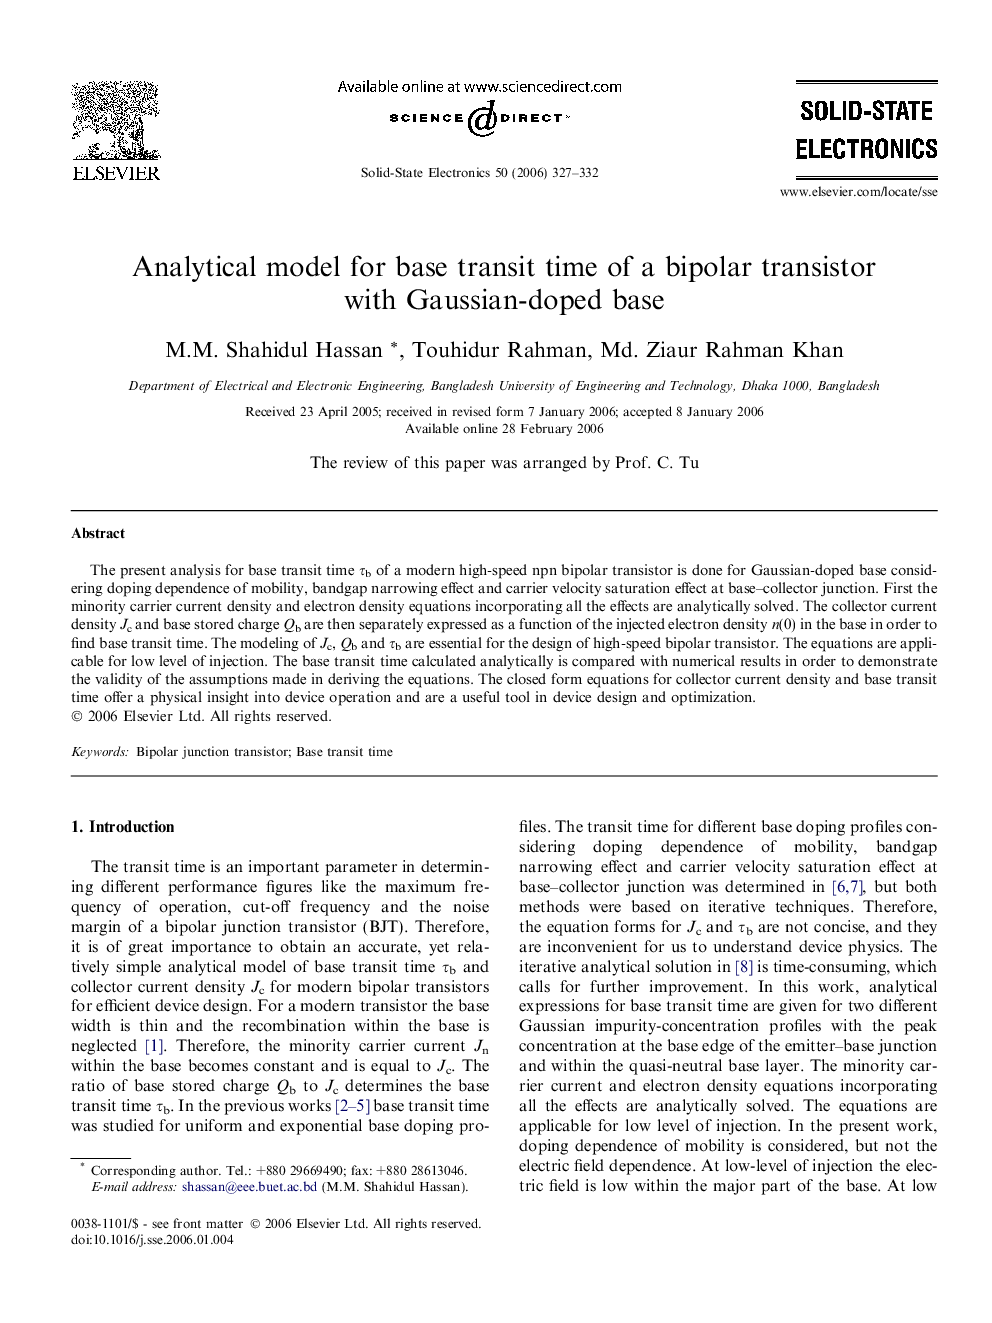 Analytical model for base transit time of a bipolar transistor with Gaussian-doped base